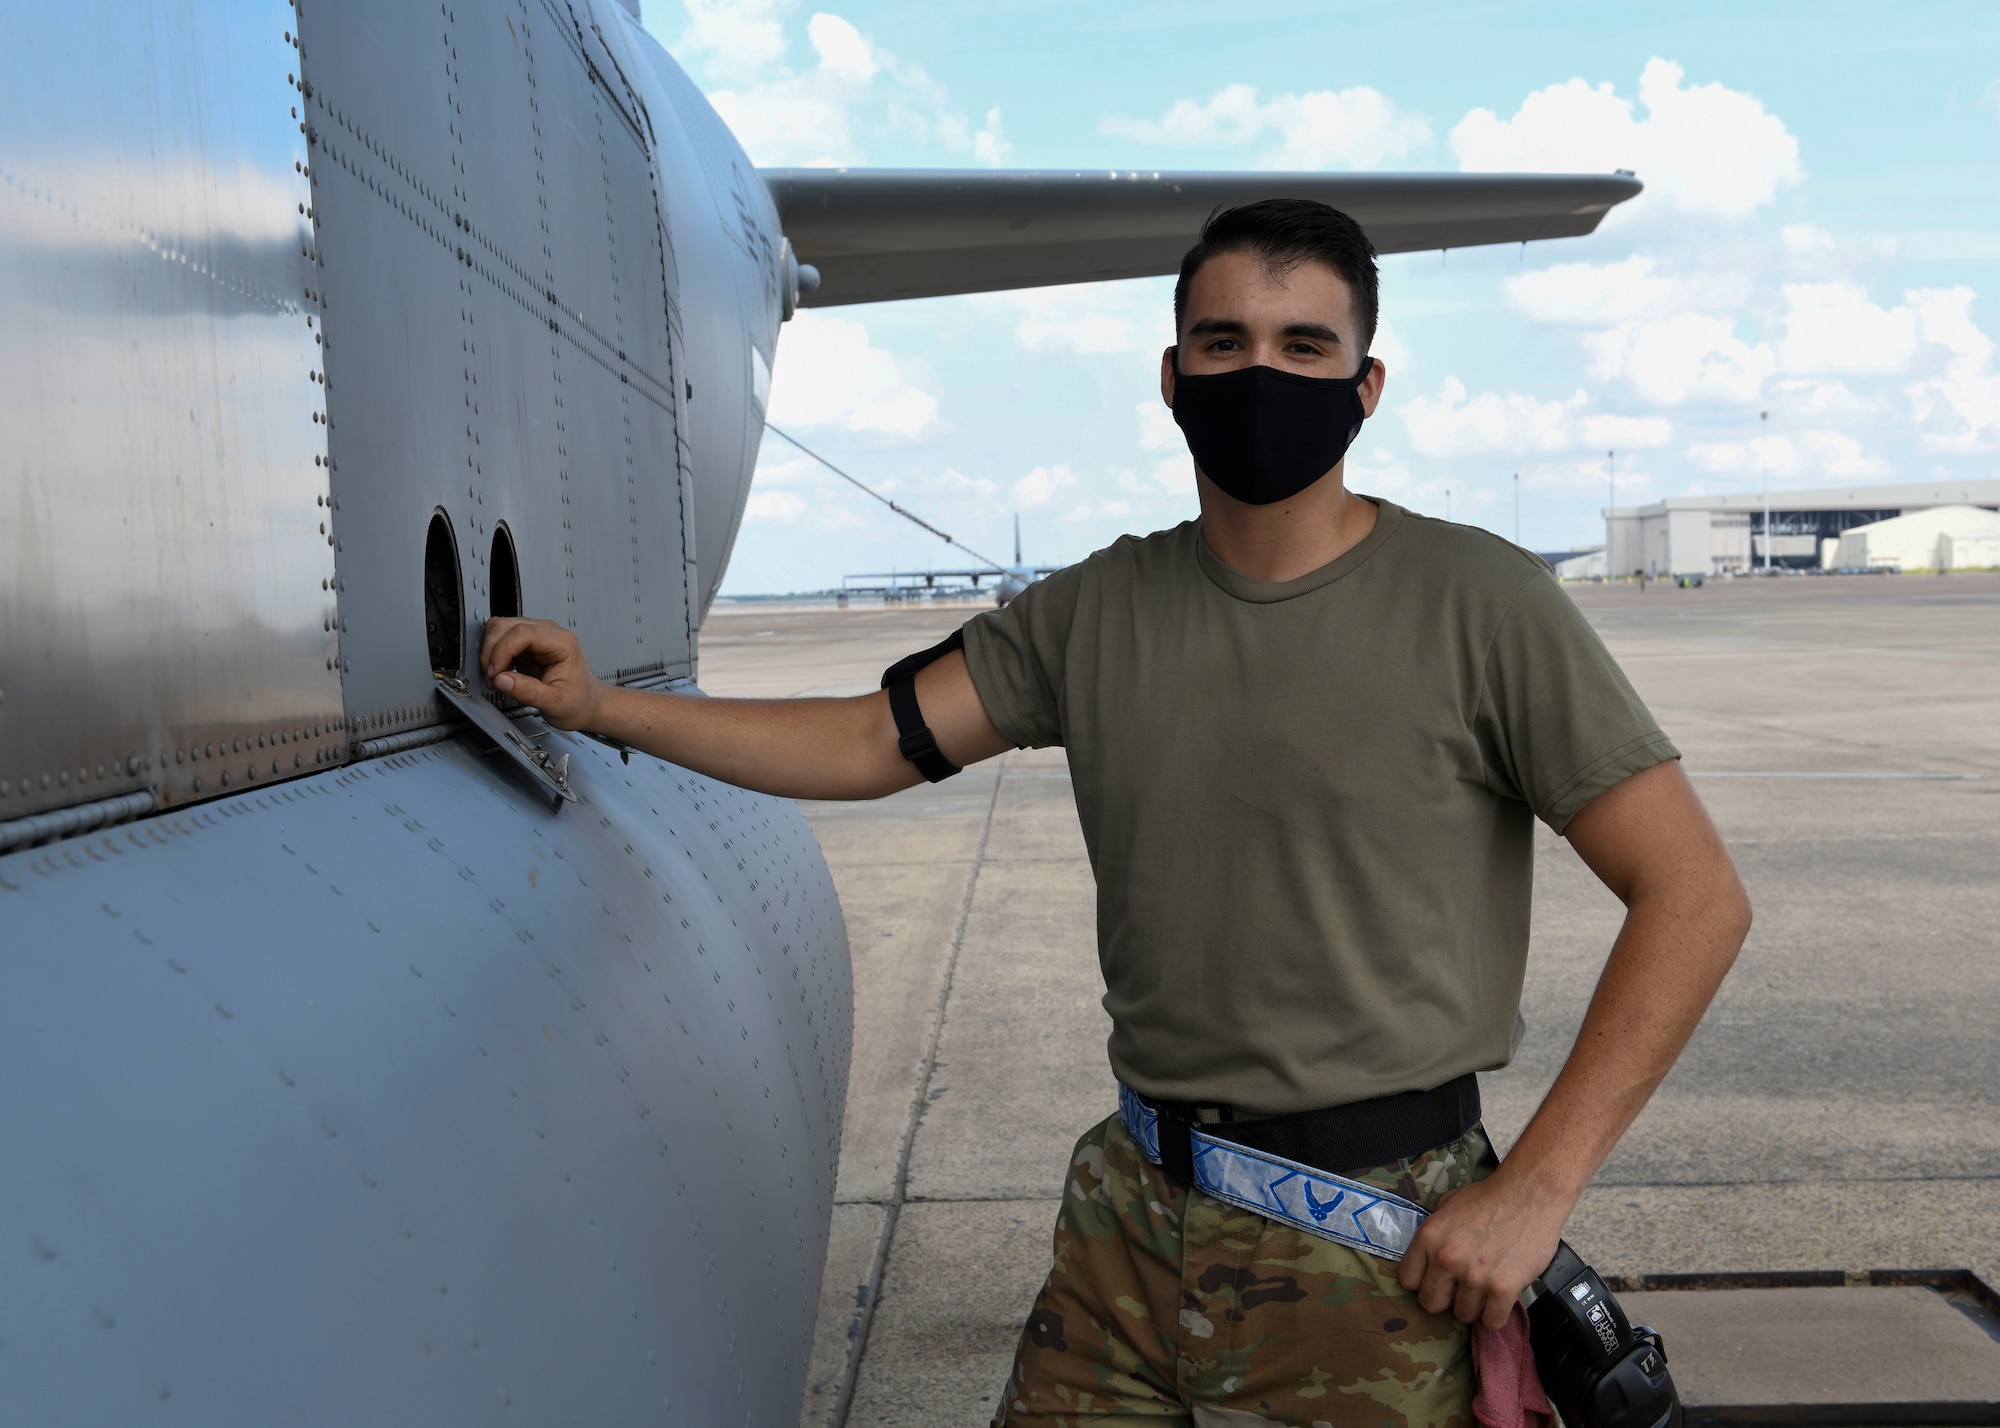 U.S. Air Force Reserve Airman 1st Class Micco Moore, 913th Aircraft Maintenance Squadron crew chief, stands next to a C-130J Super Hercules at Little Rock Air Force Base, Ark., Sept. 10, 2020.